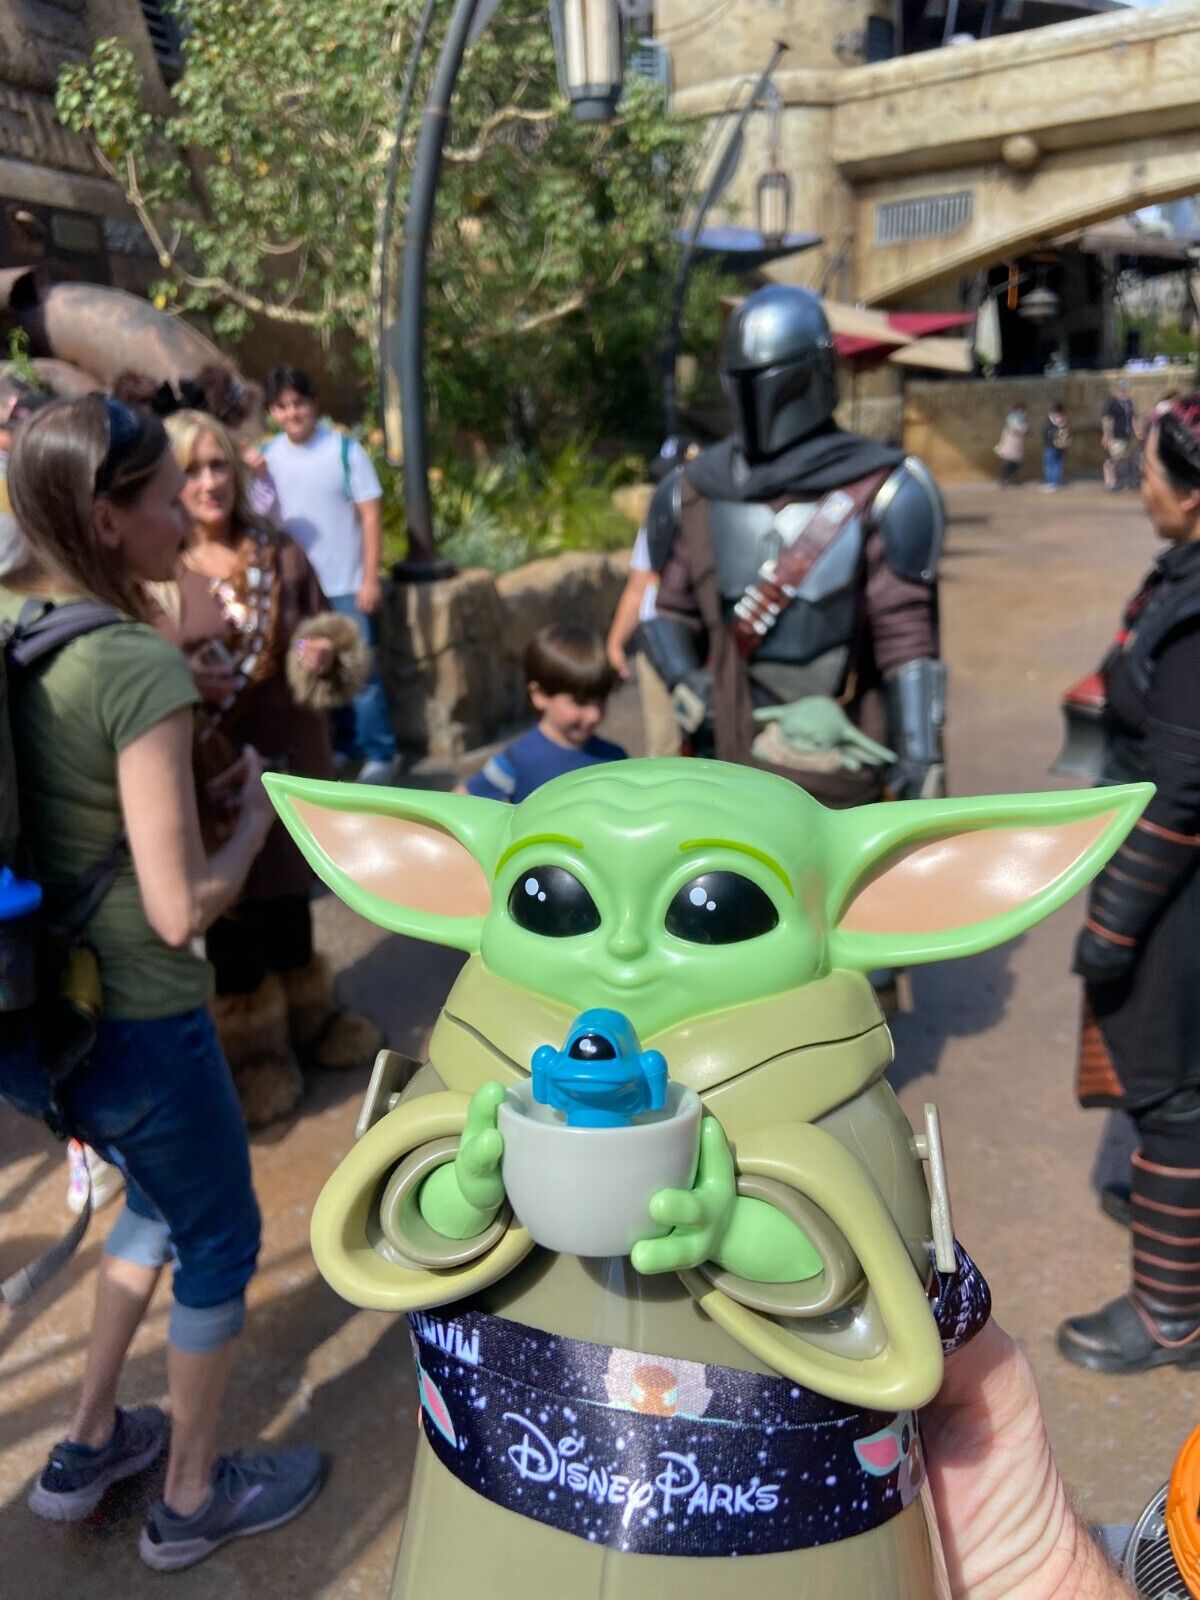 NEW Disneyland Star Wars Grogu Sipper Baby Yoda Sipper May the 4th Be With You